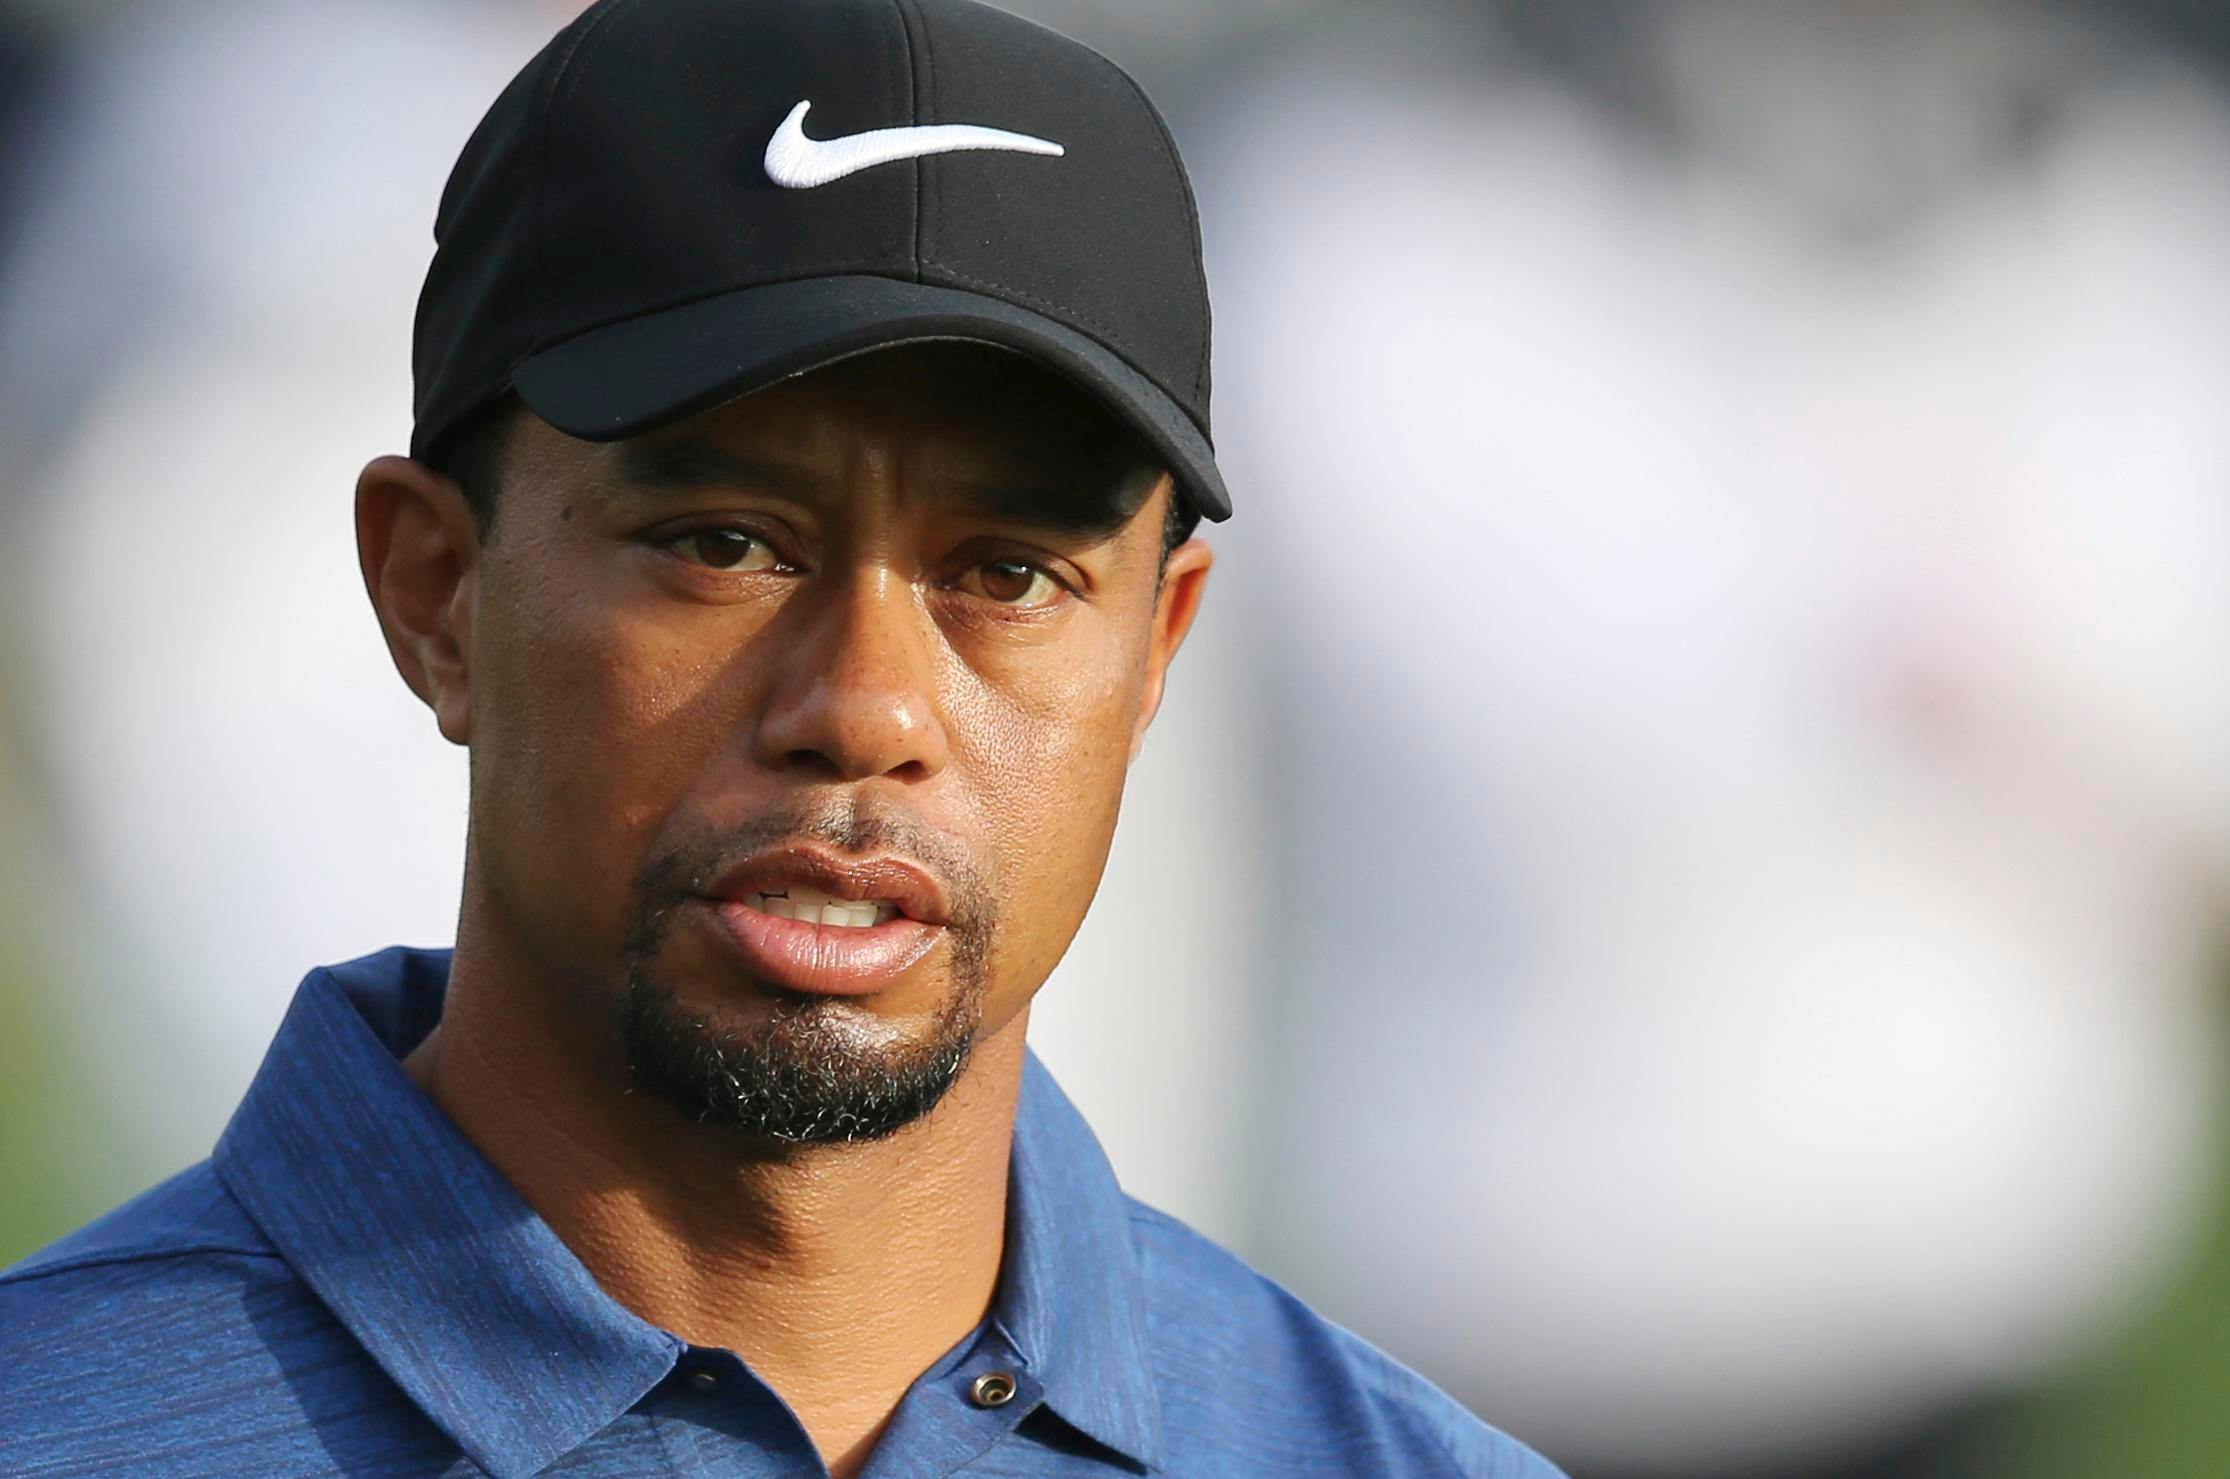 tiger woods is threatening to take a celebrity gossip website to court for leaking a nude